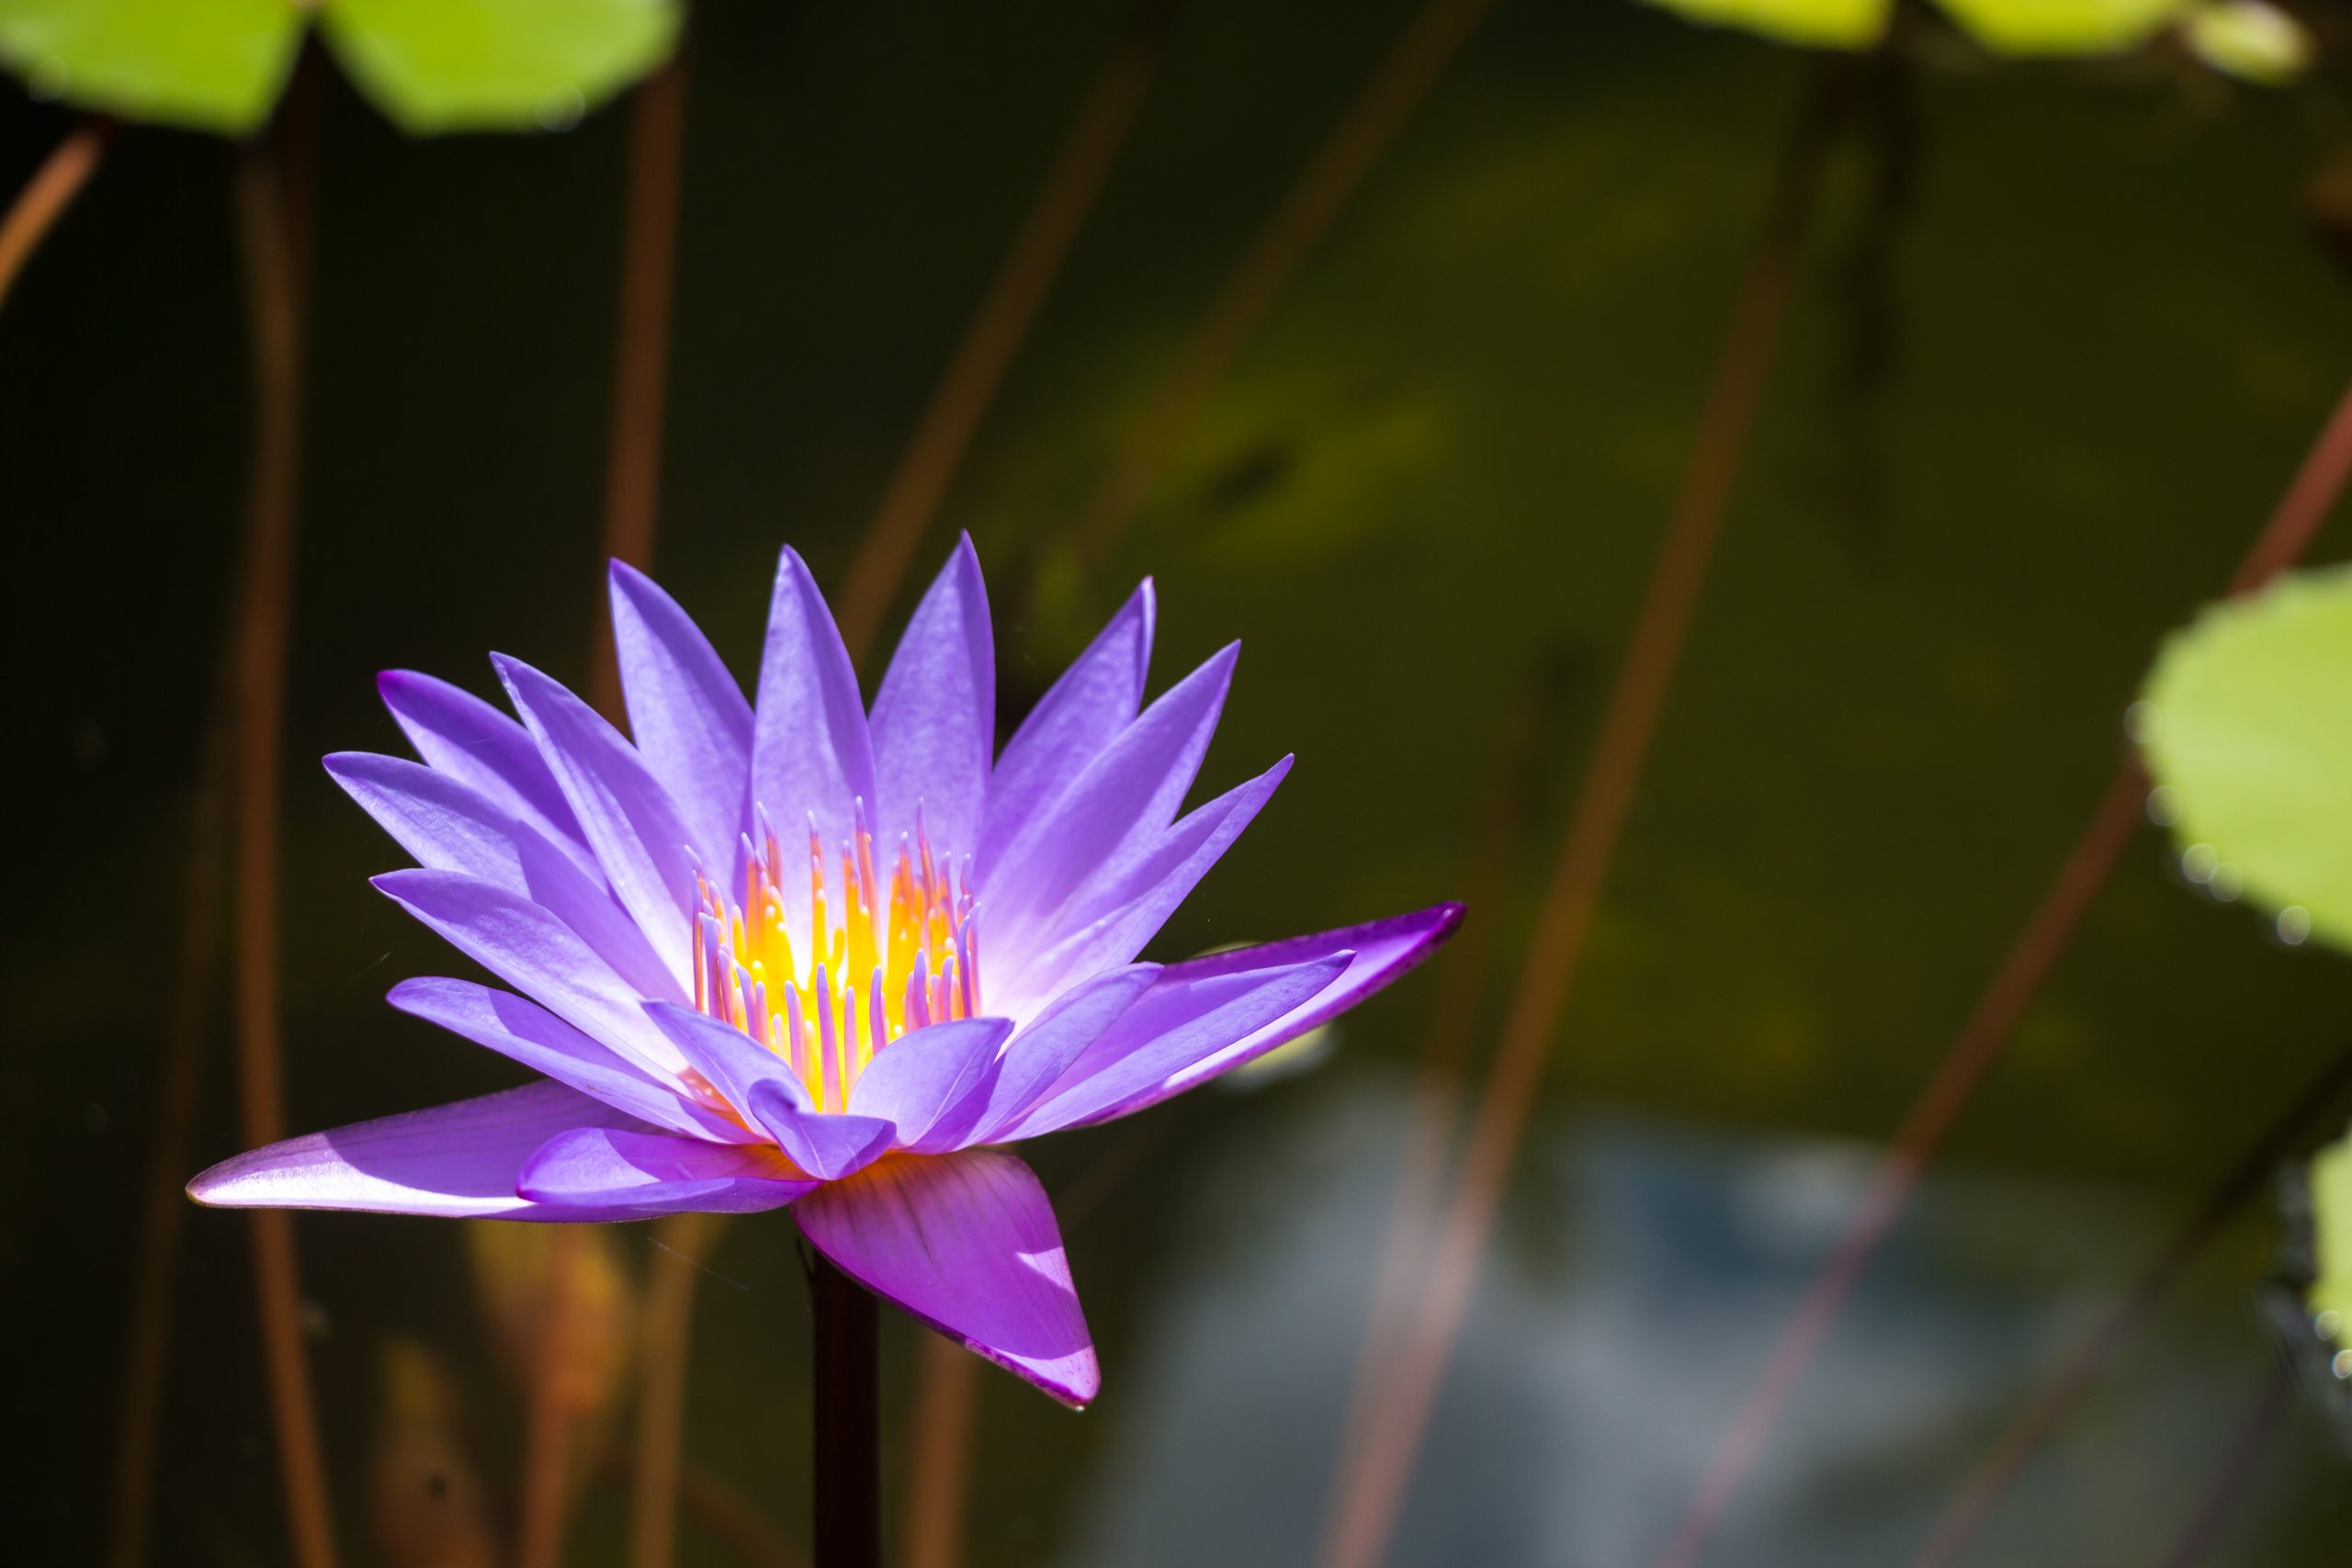 Blue Lily: The Sacred Blue Lotus of the Nile